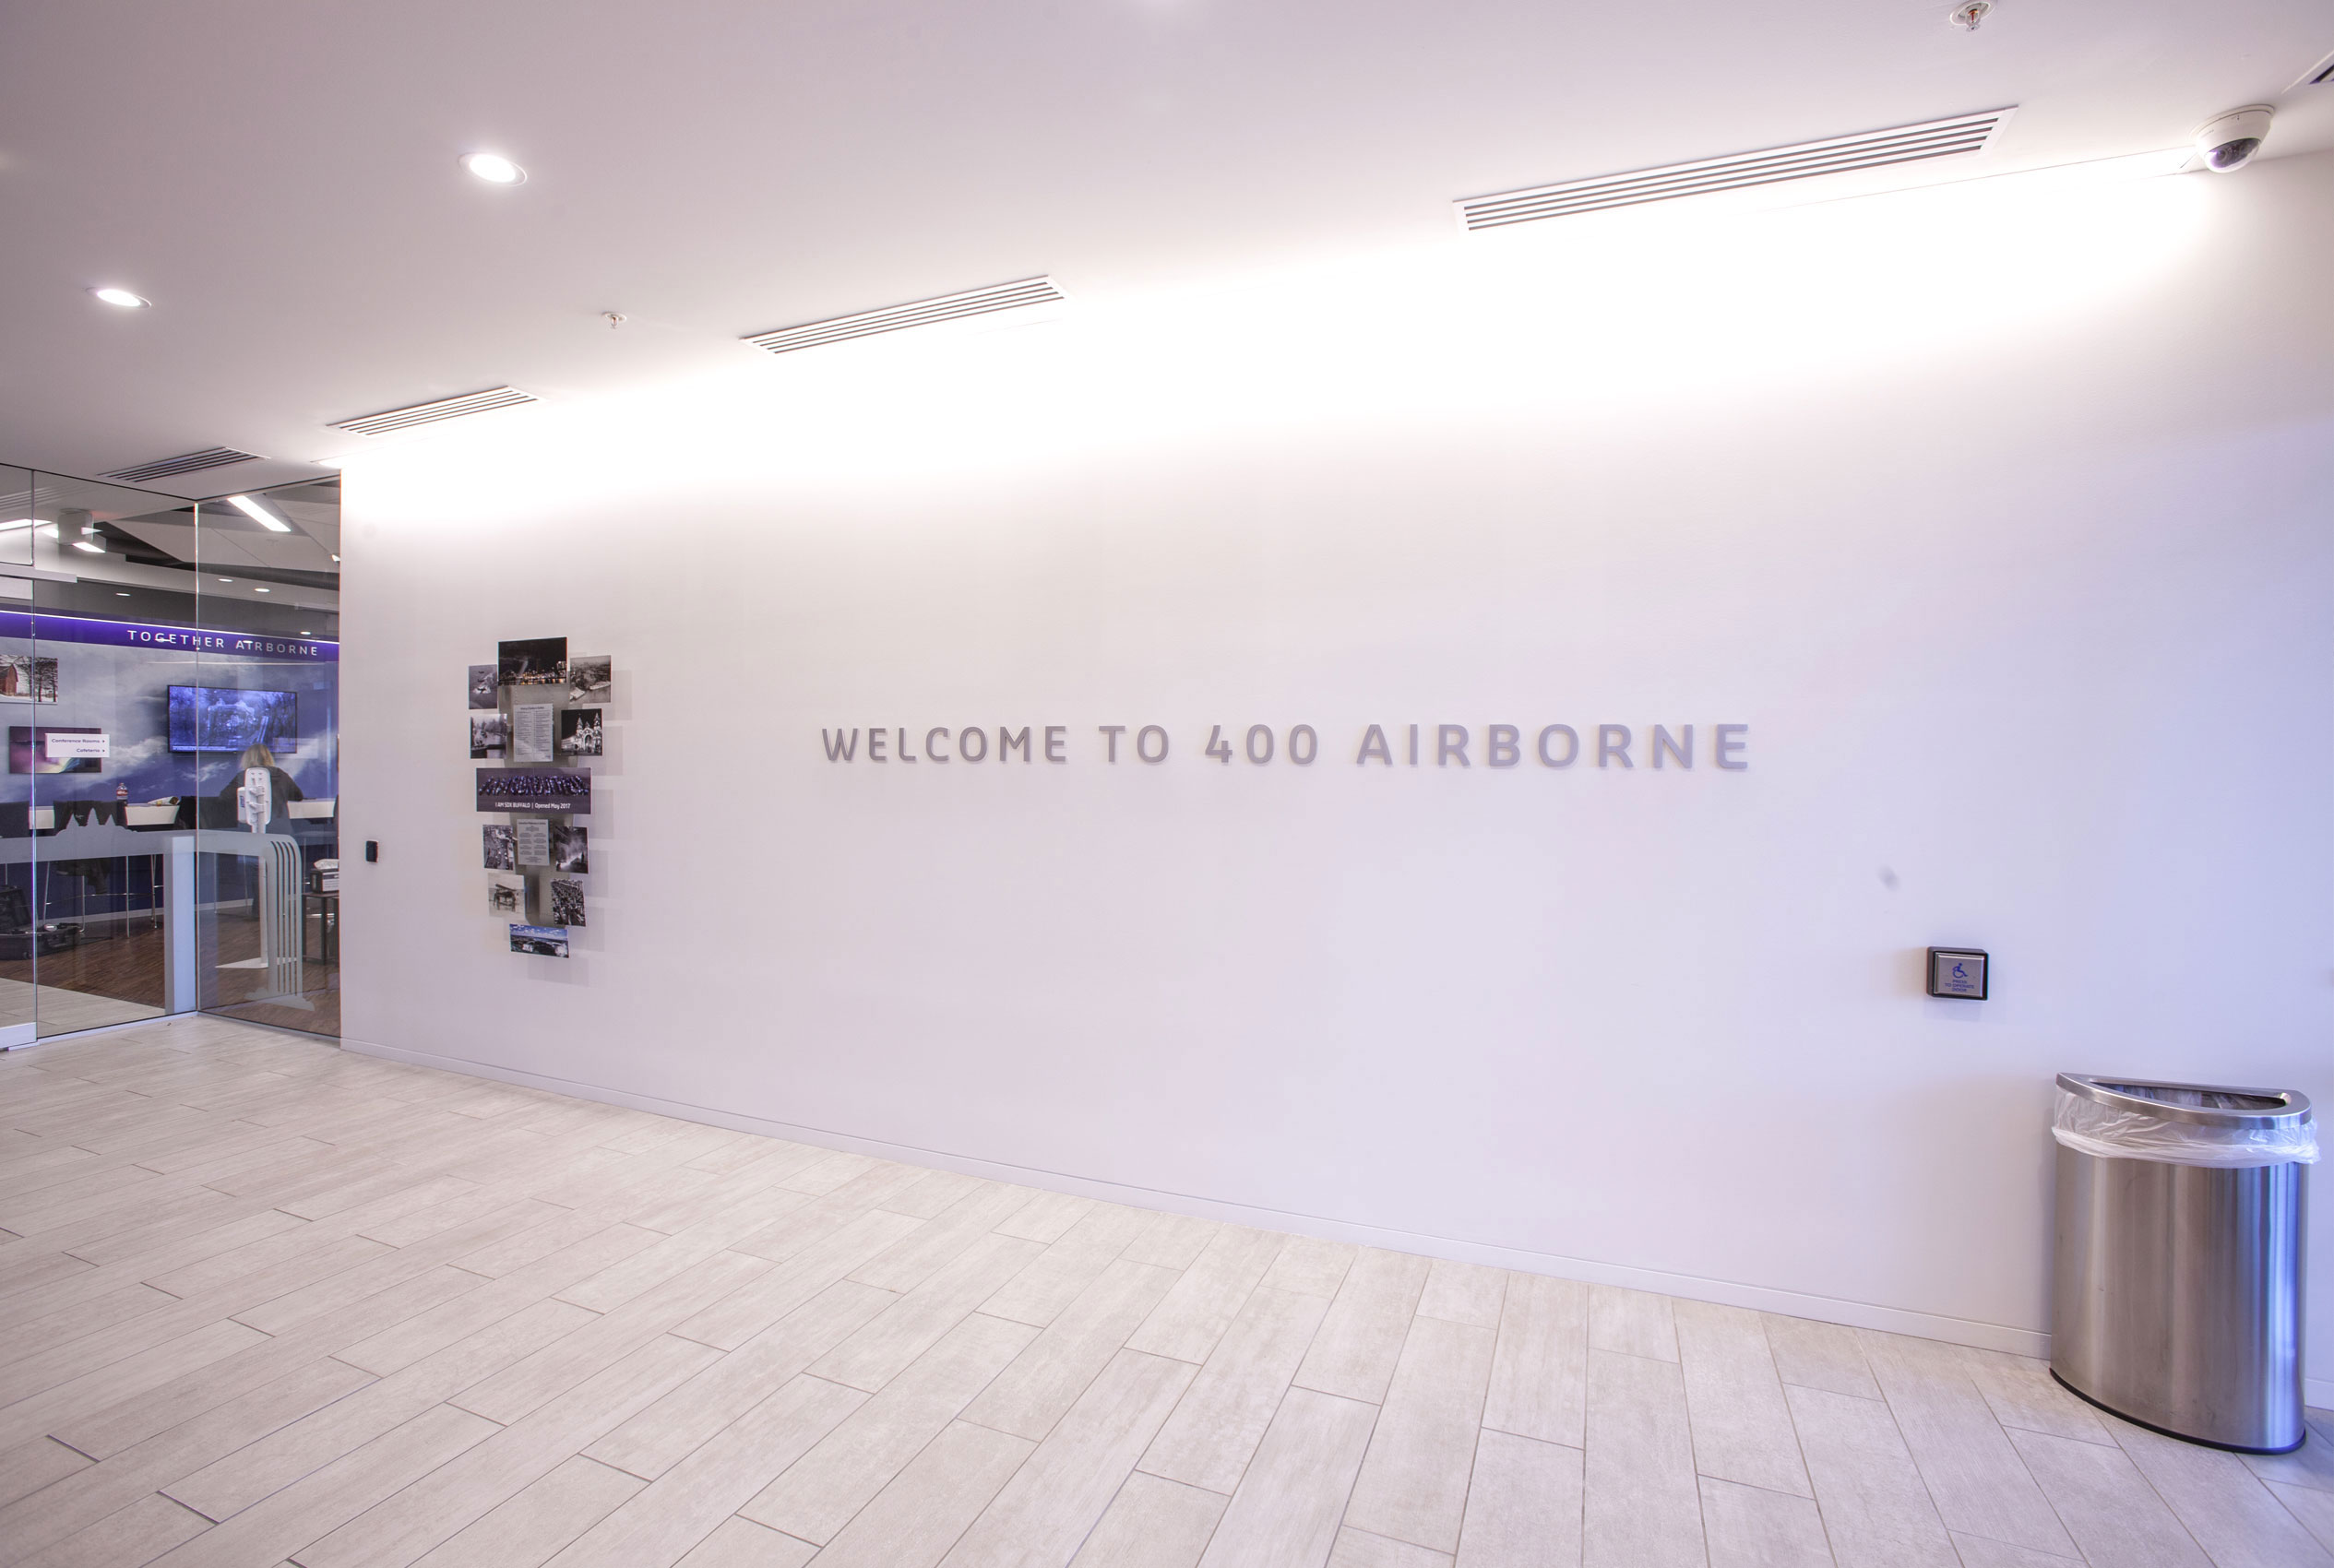 Welcome to 400 Airborne